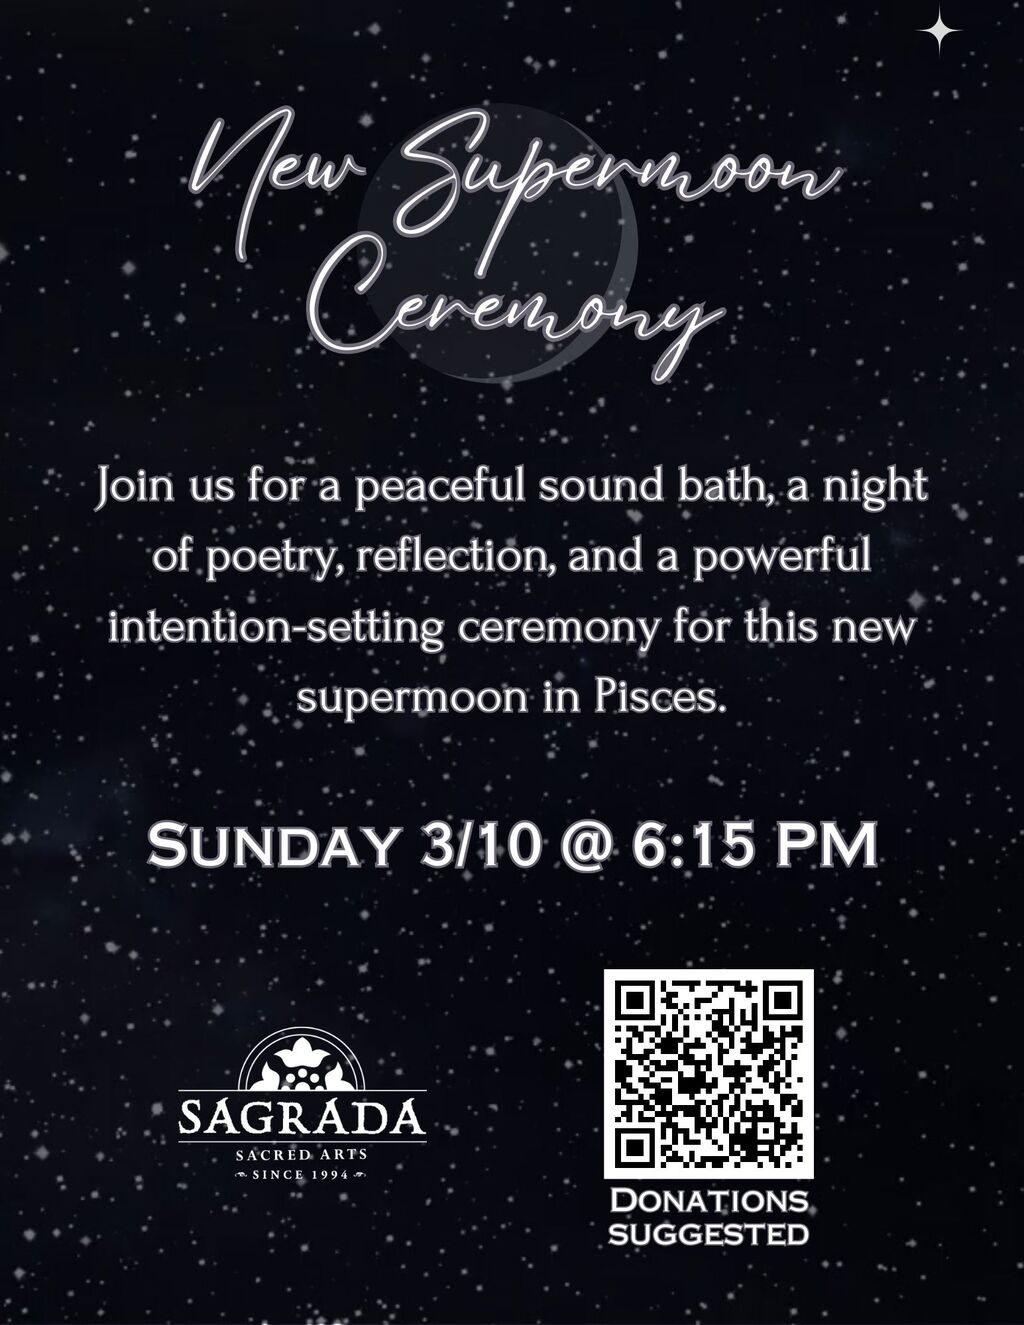 Sagrada Sacred Arts Celebrate the Supermoon with a Sound Bath  Poetry Night  and Intention Setting Ceremony promotion flier on Digifli com